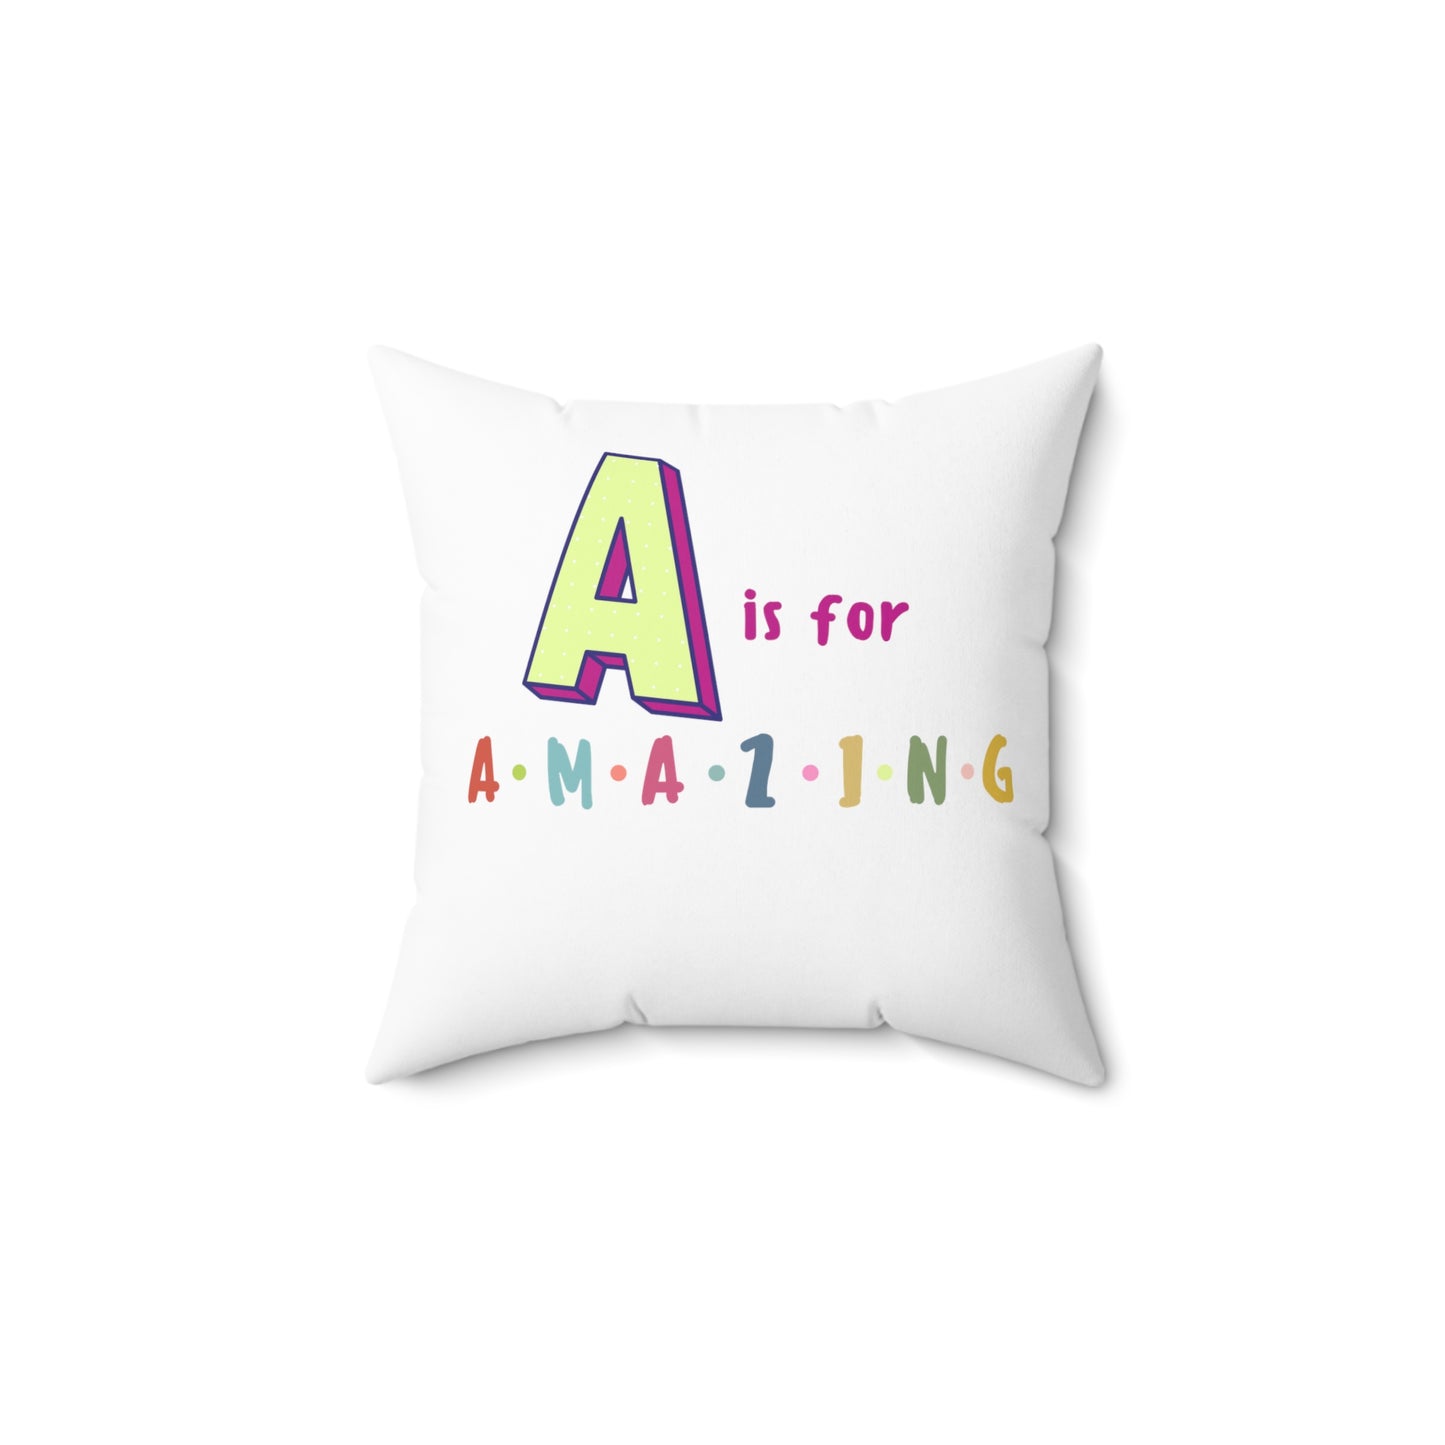 A is for AMAZING Spun Polyester Square Pillow